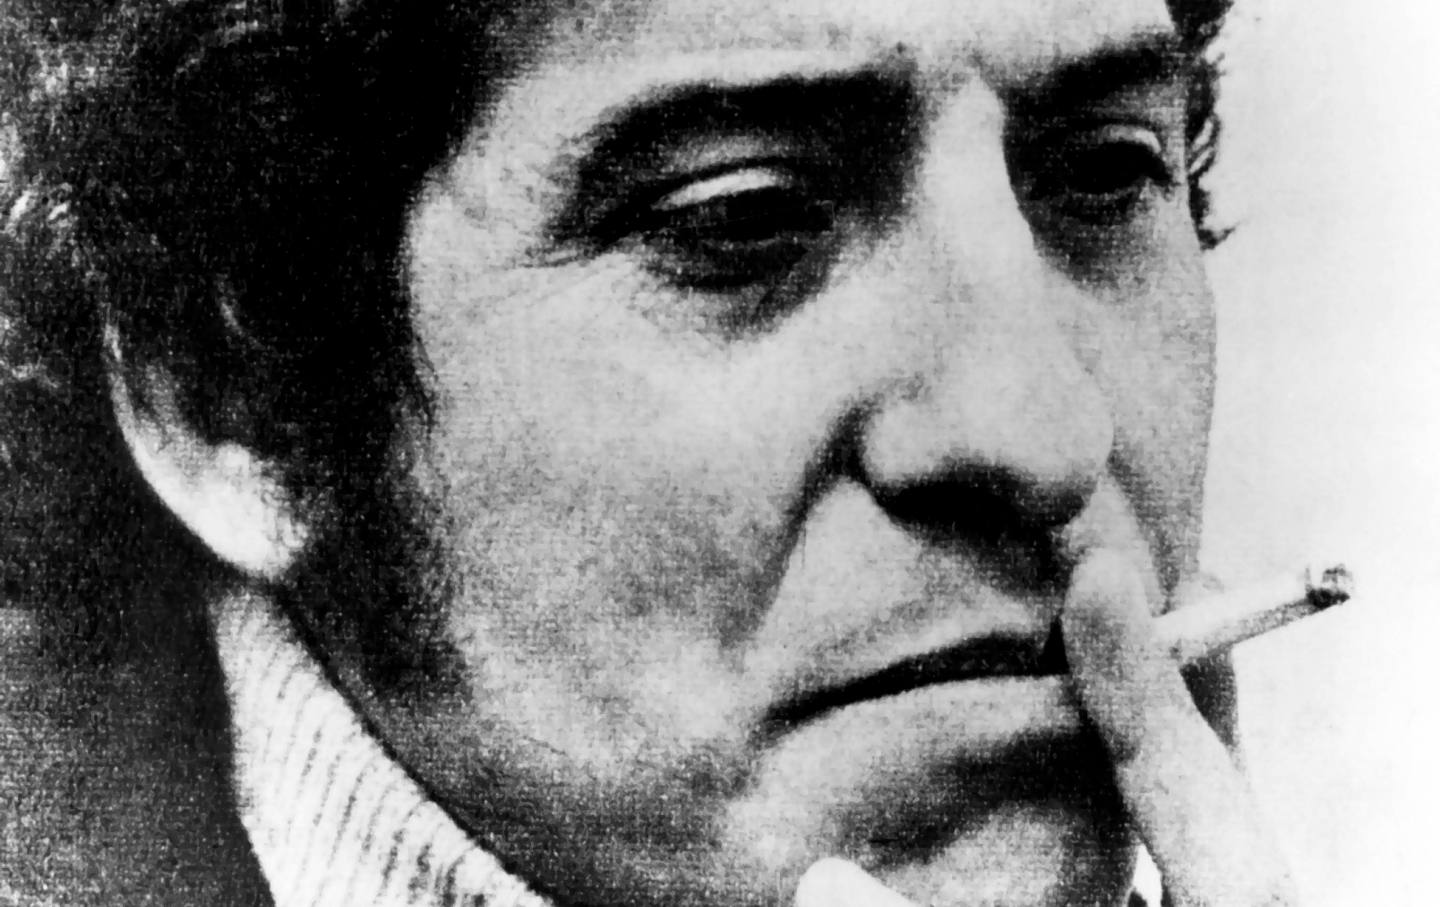 A Measure of Justice at Last for Victor Jara